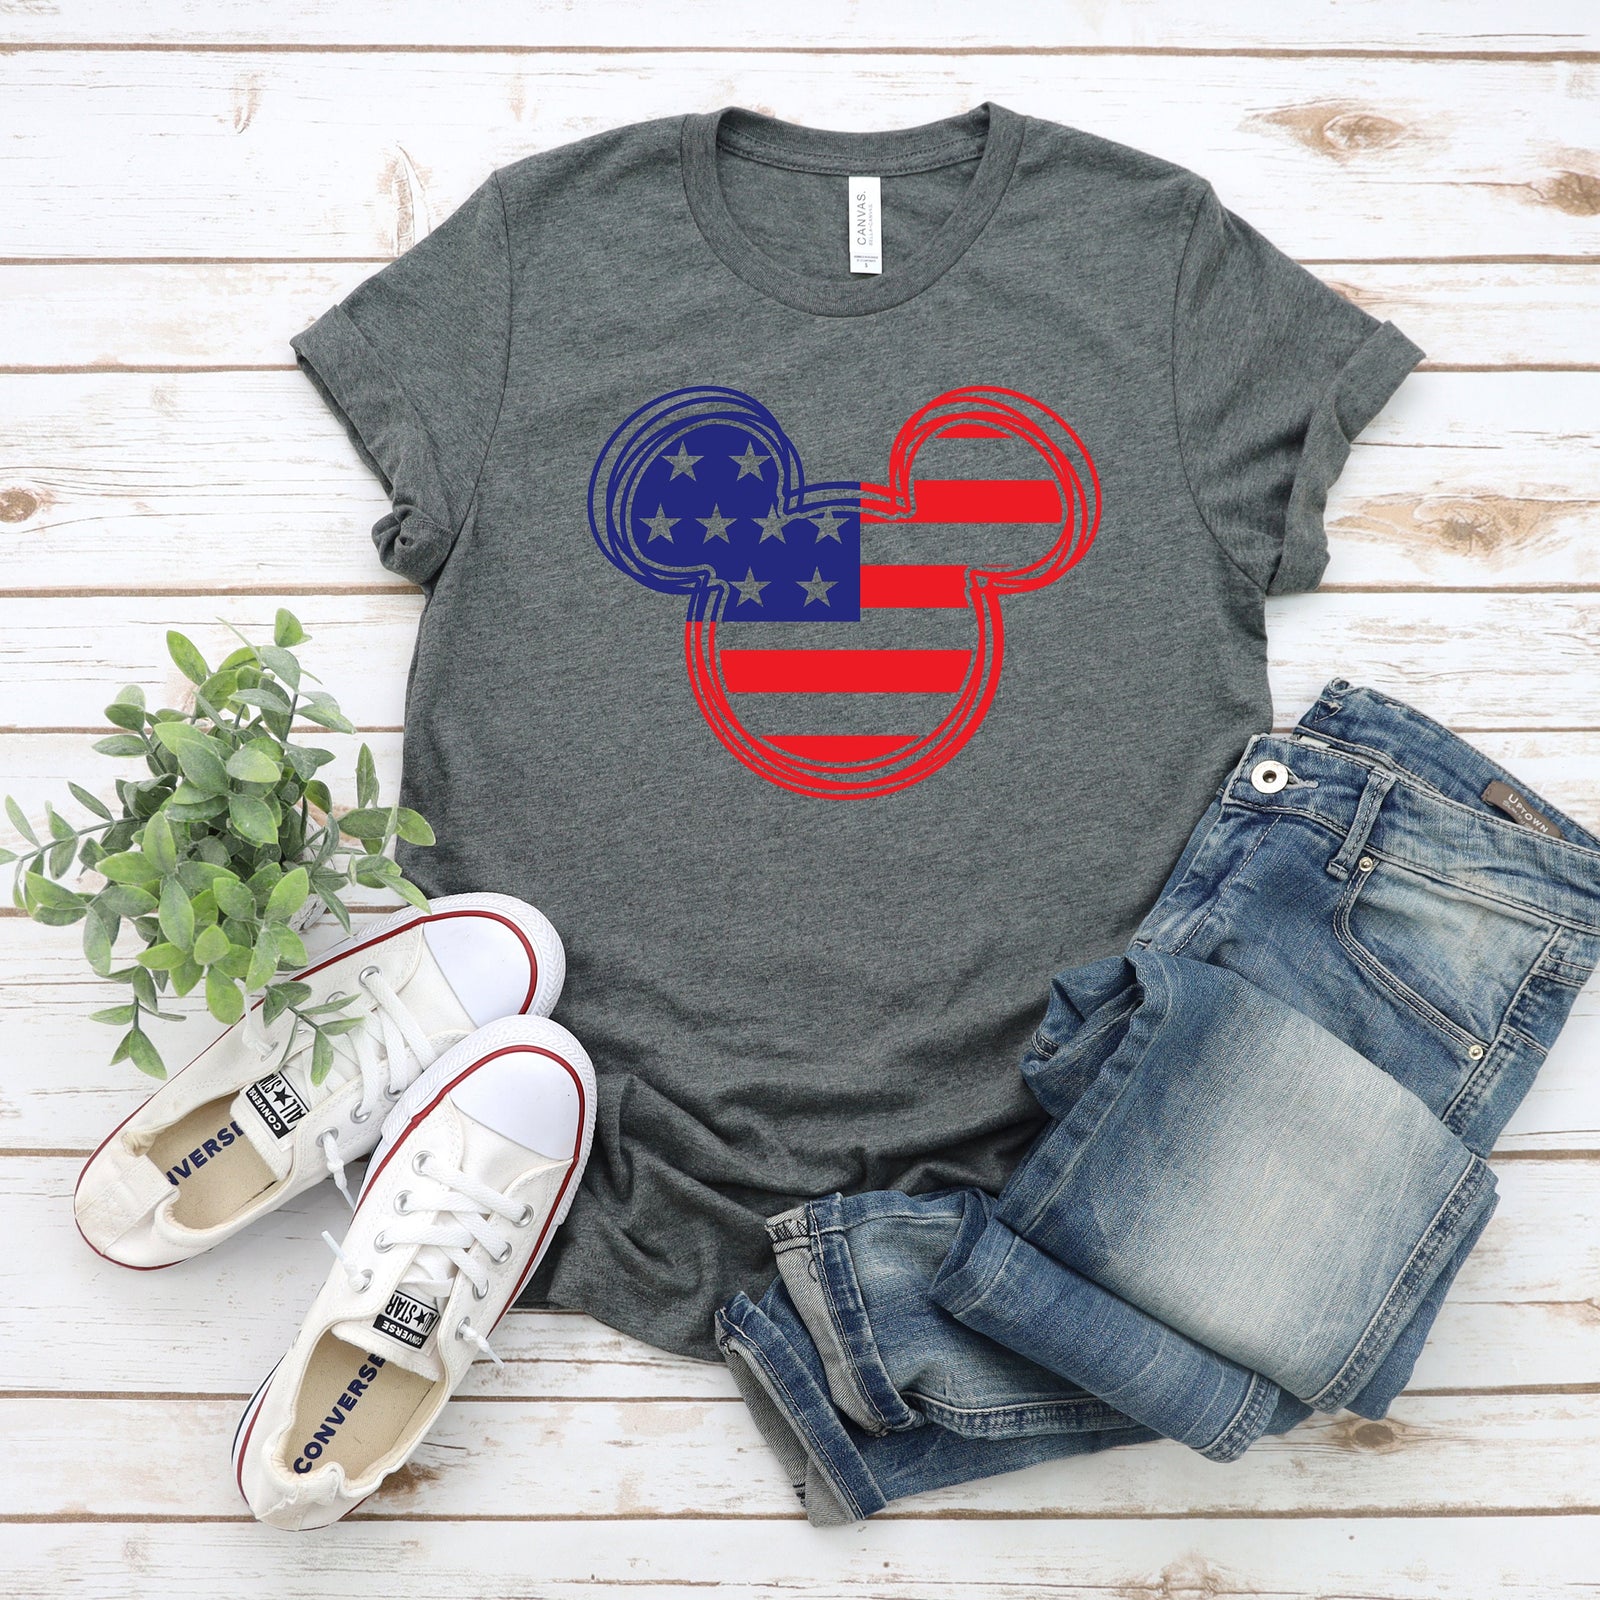 Scribble Mickey Mouse Stars and Stripes - Fourth of July Adult T Shirt - Independence Day - Memorial - Red White and Blue - Unisex Shirt